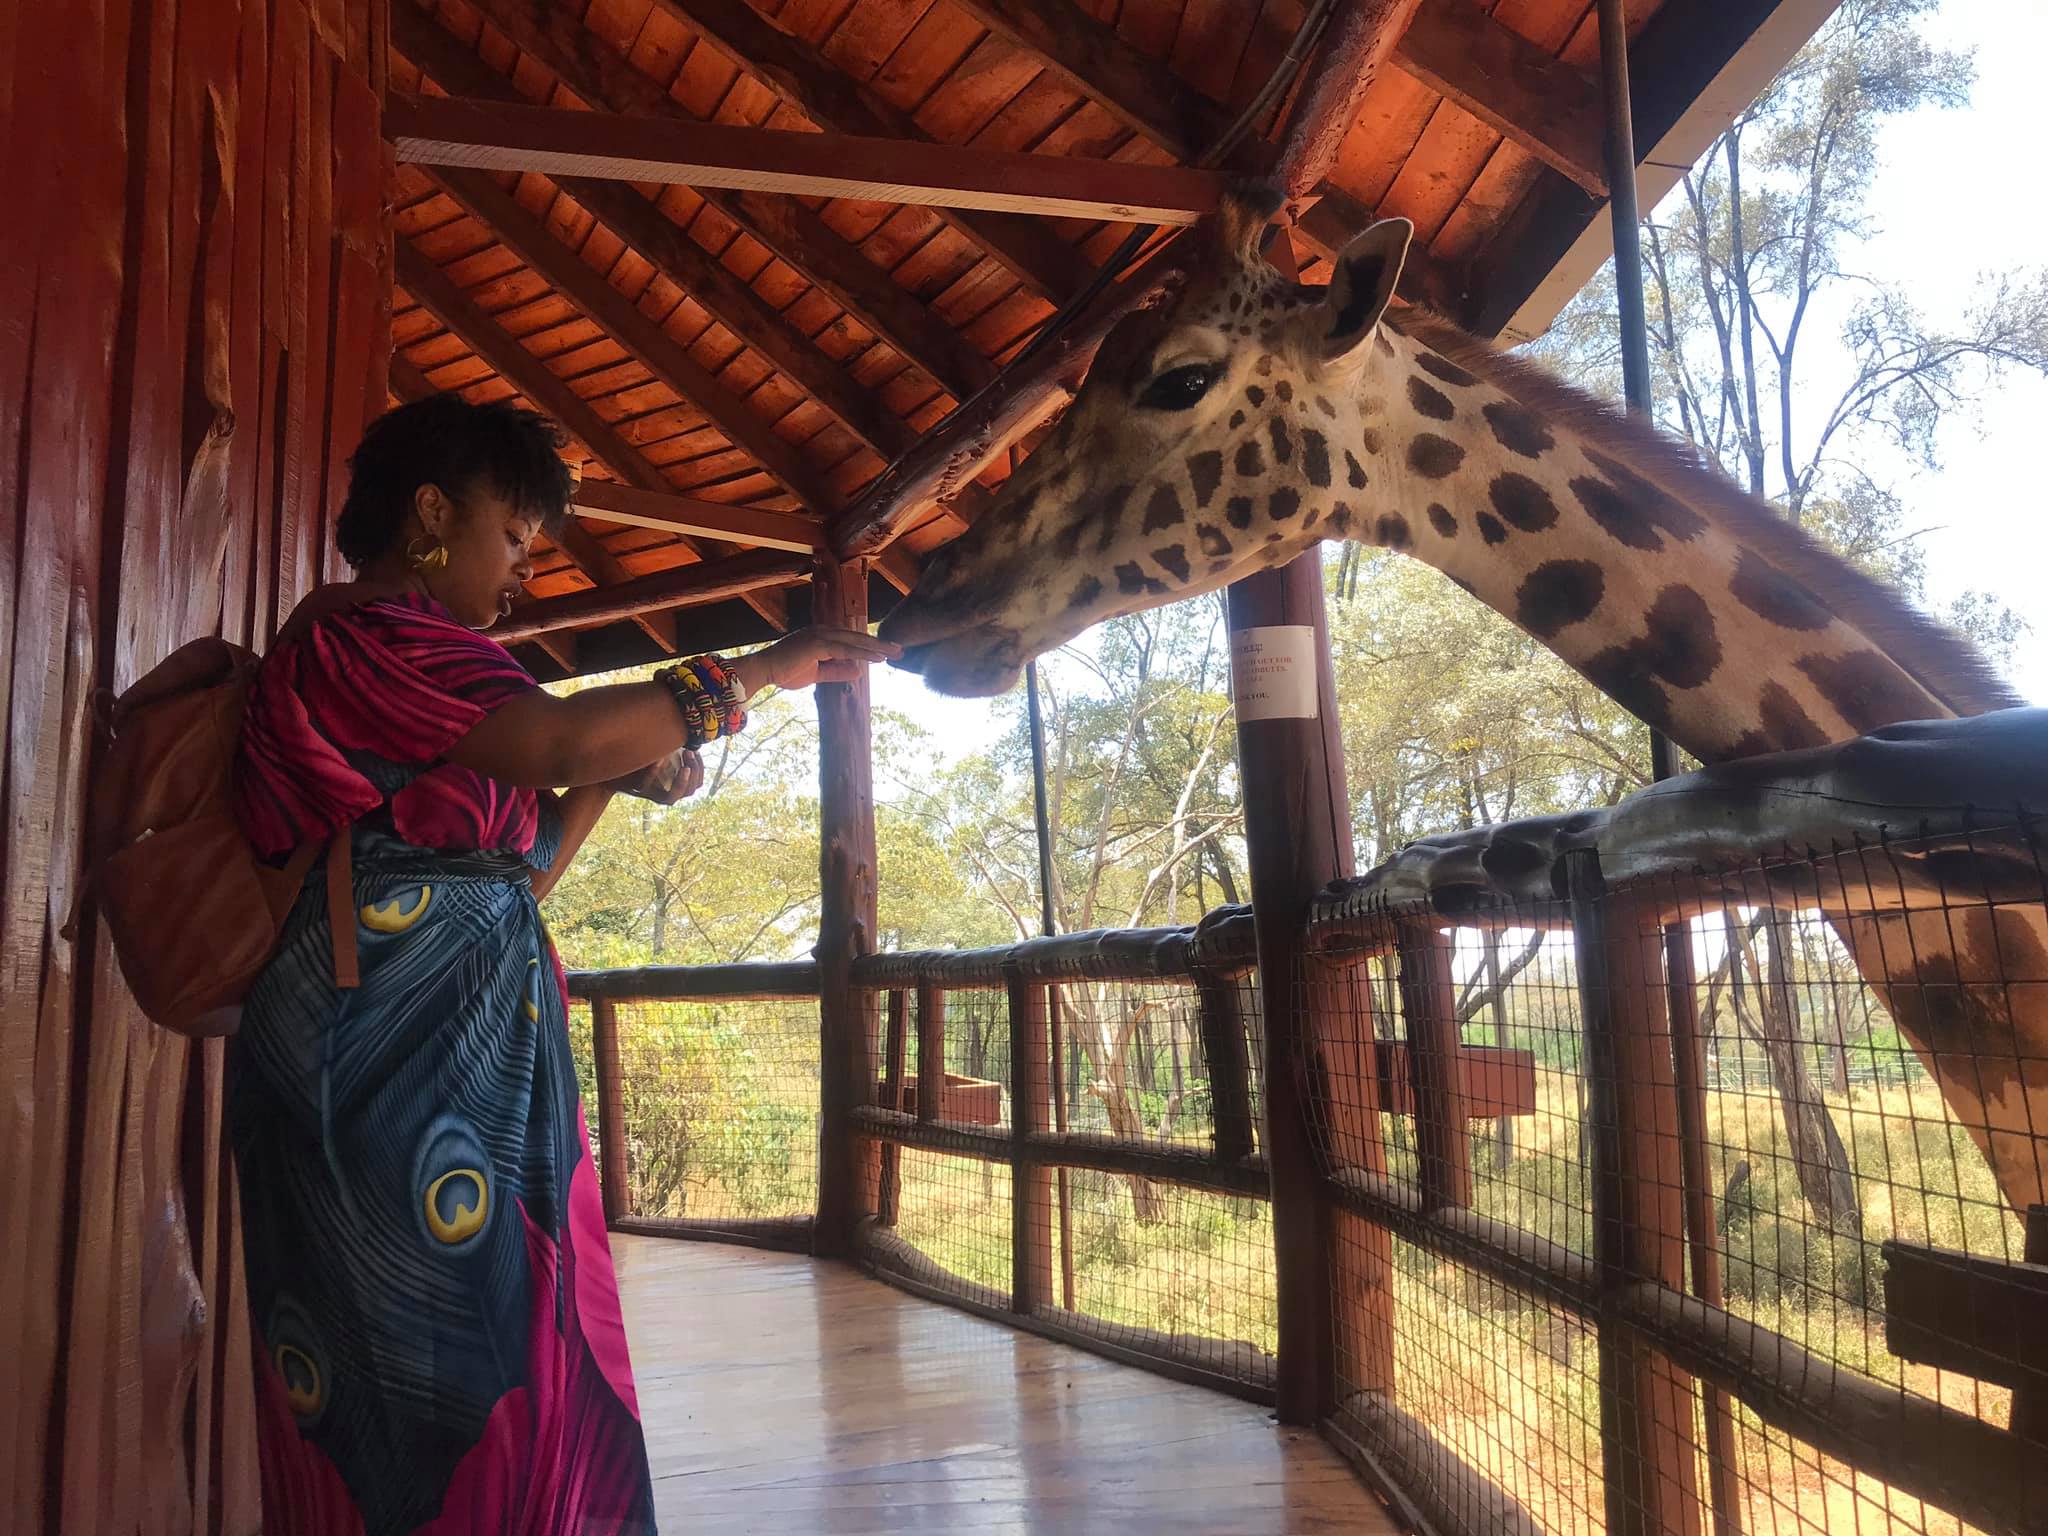  Definitely go to the Giraffe Center. I mean its Giraffes and you can feed them. It took us about an hour to get there from Westlands. Costs a 1000 Kenya shillings to enter. Thats about $10. They accept debit cards. I used my Sierra Leone issued UBA 